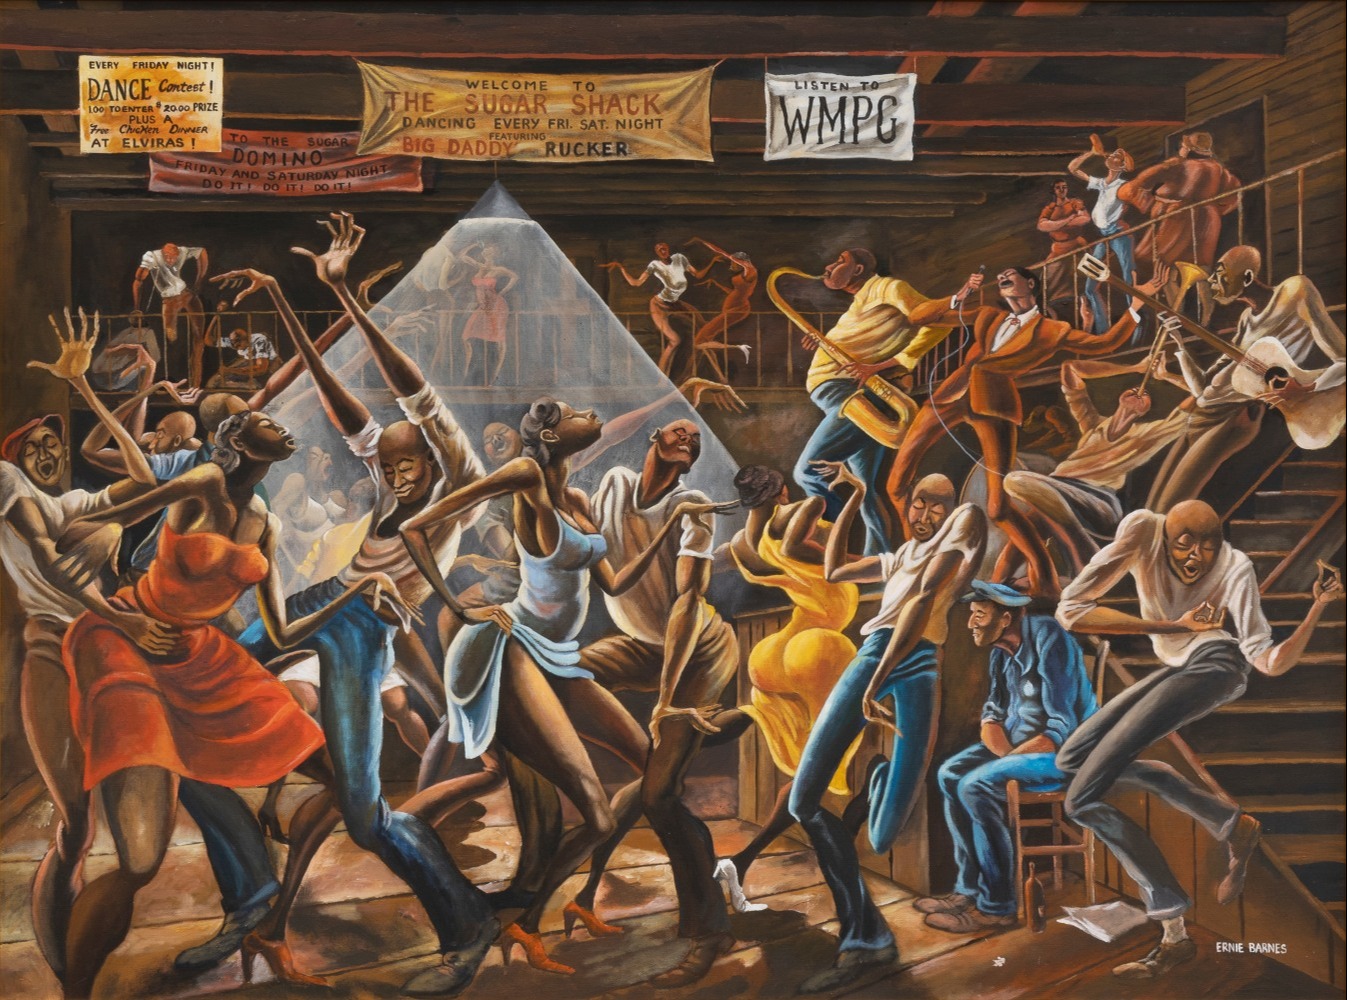 About the Artwork   by Ernie Barnes